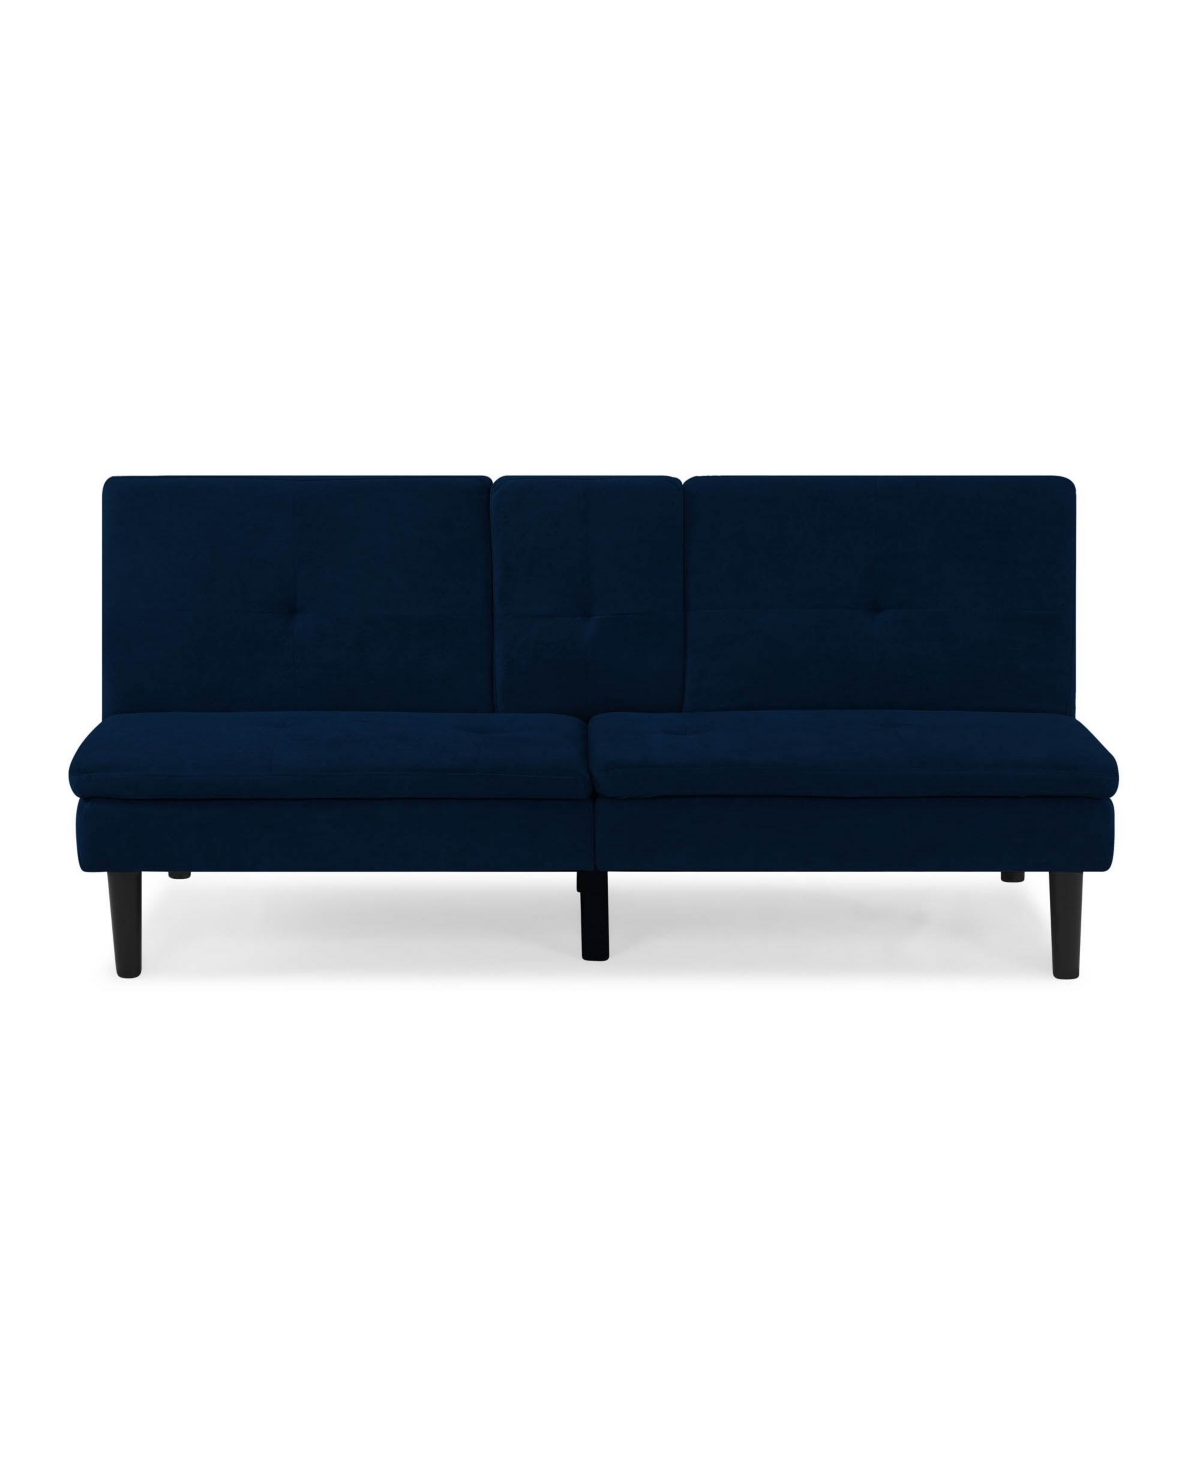 Lifestyle Solutions Serta Misa Convertible Futon With Power And Usb Ports In Navy